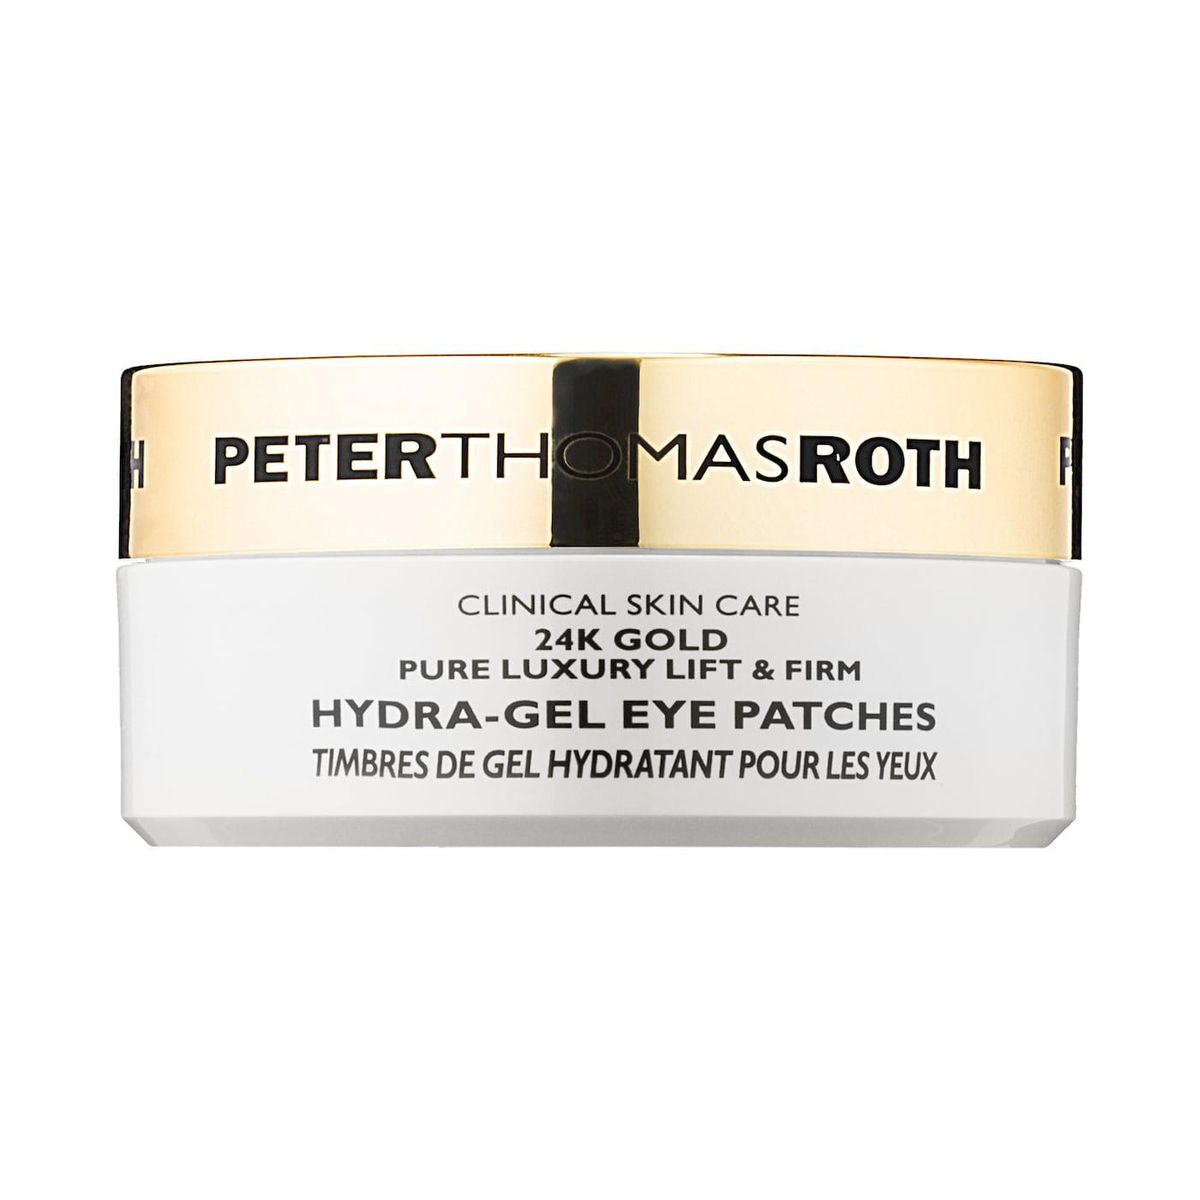 peter thomas roth 24k gold pure luxury lift and firm hydra gel eye patches